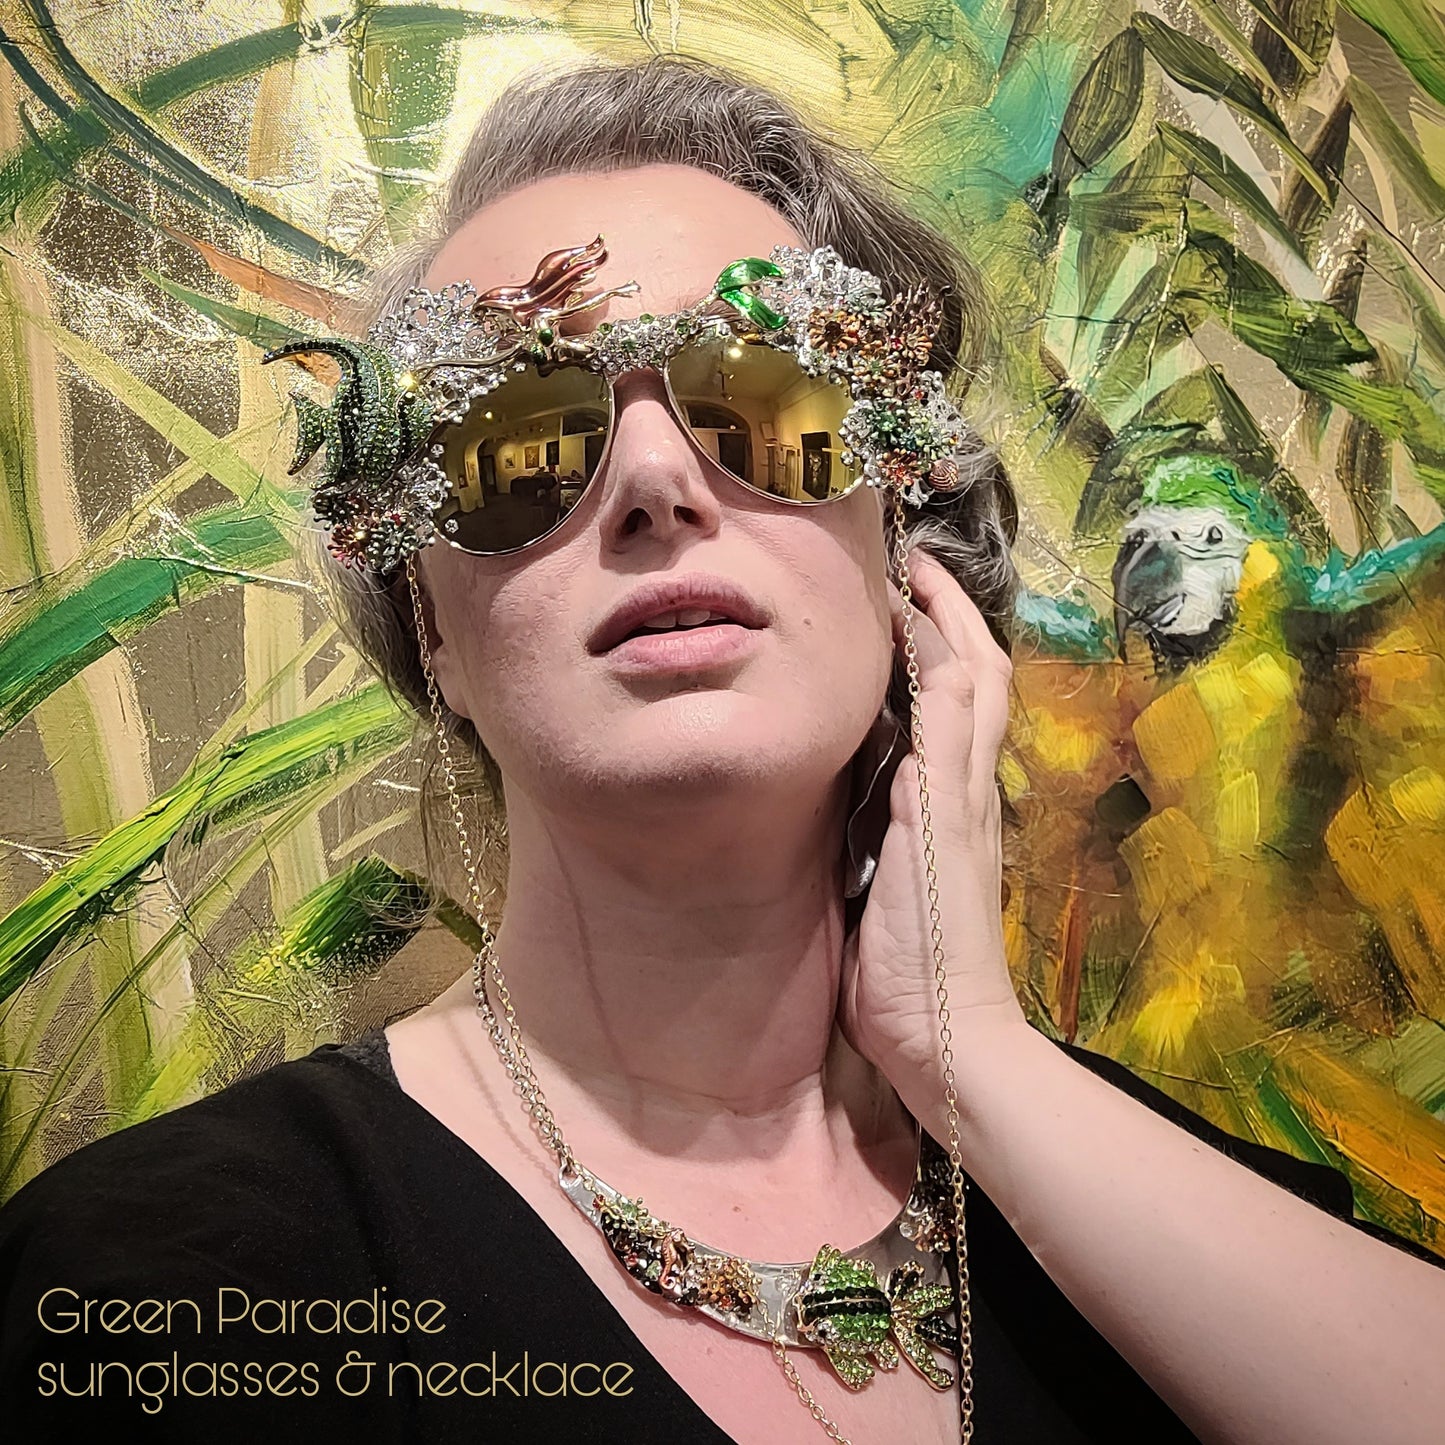 Shifting Depths collection: the Green Paradise showpiece sunglasses